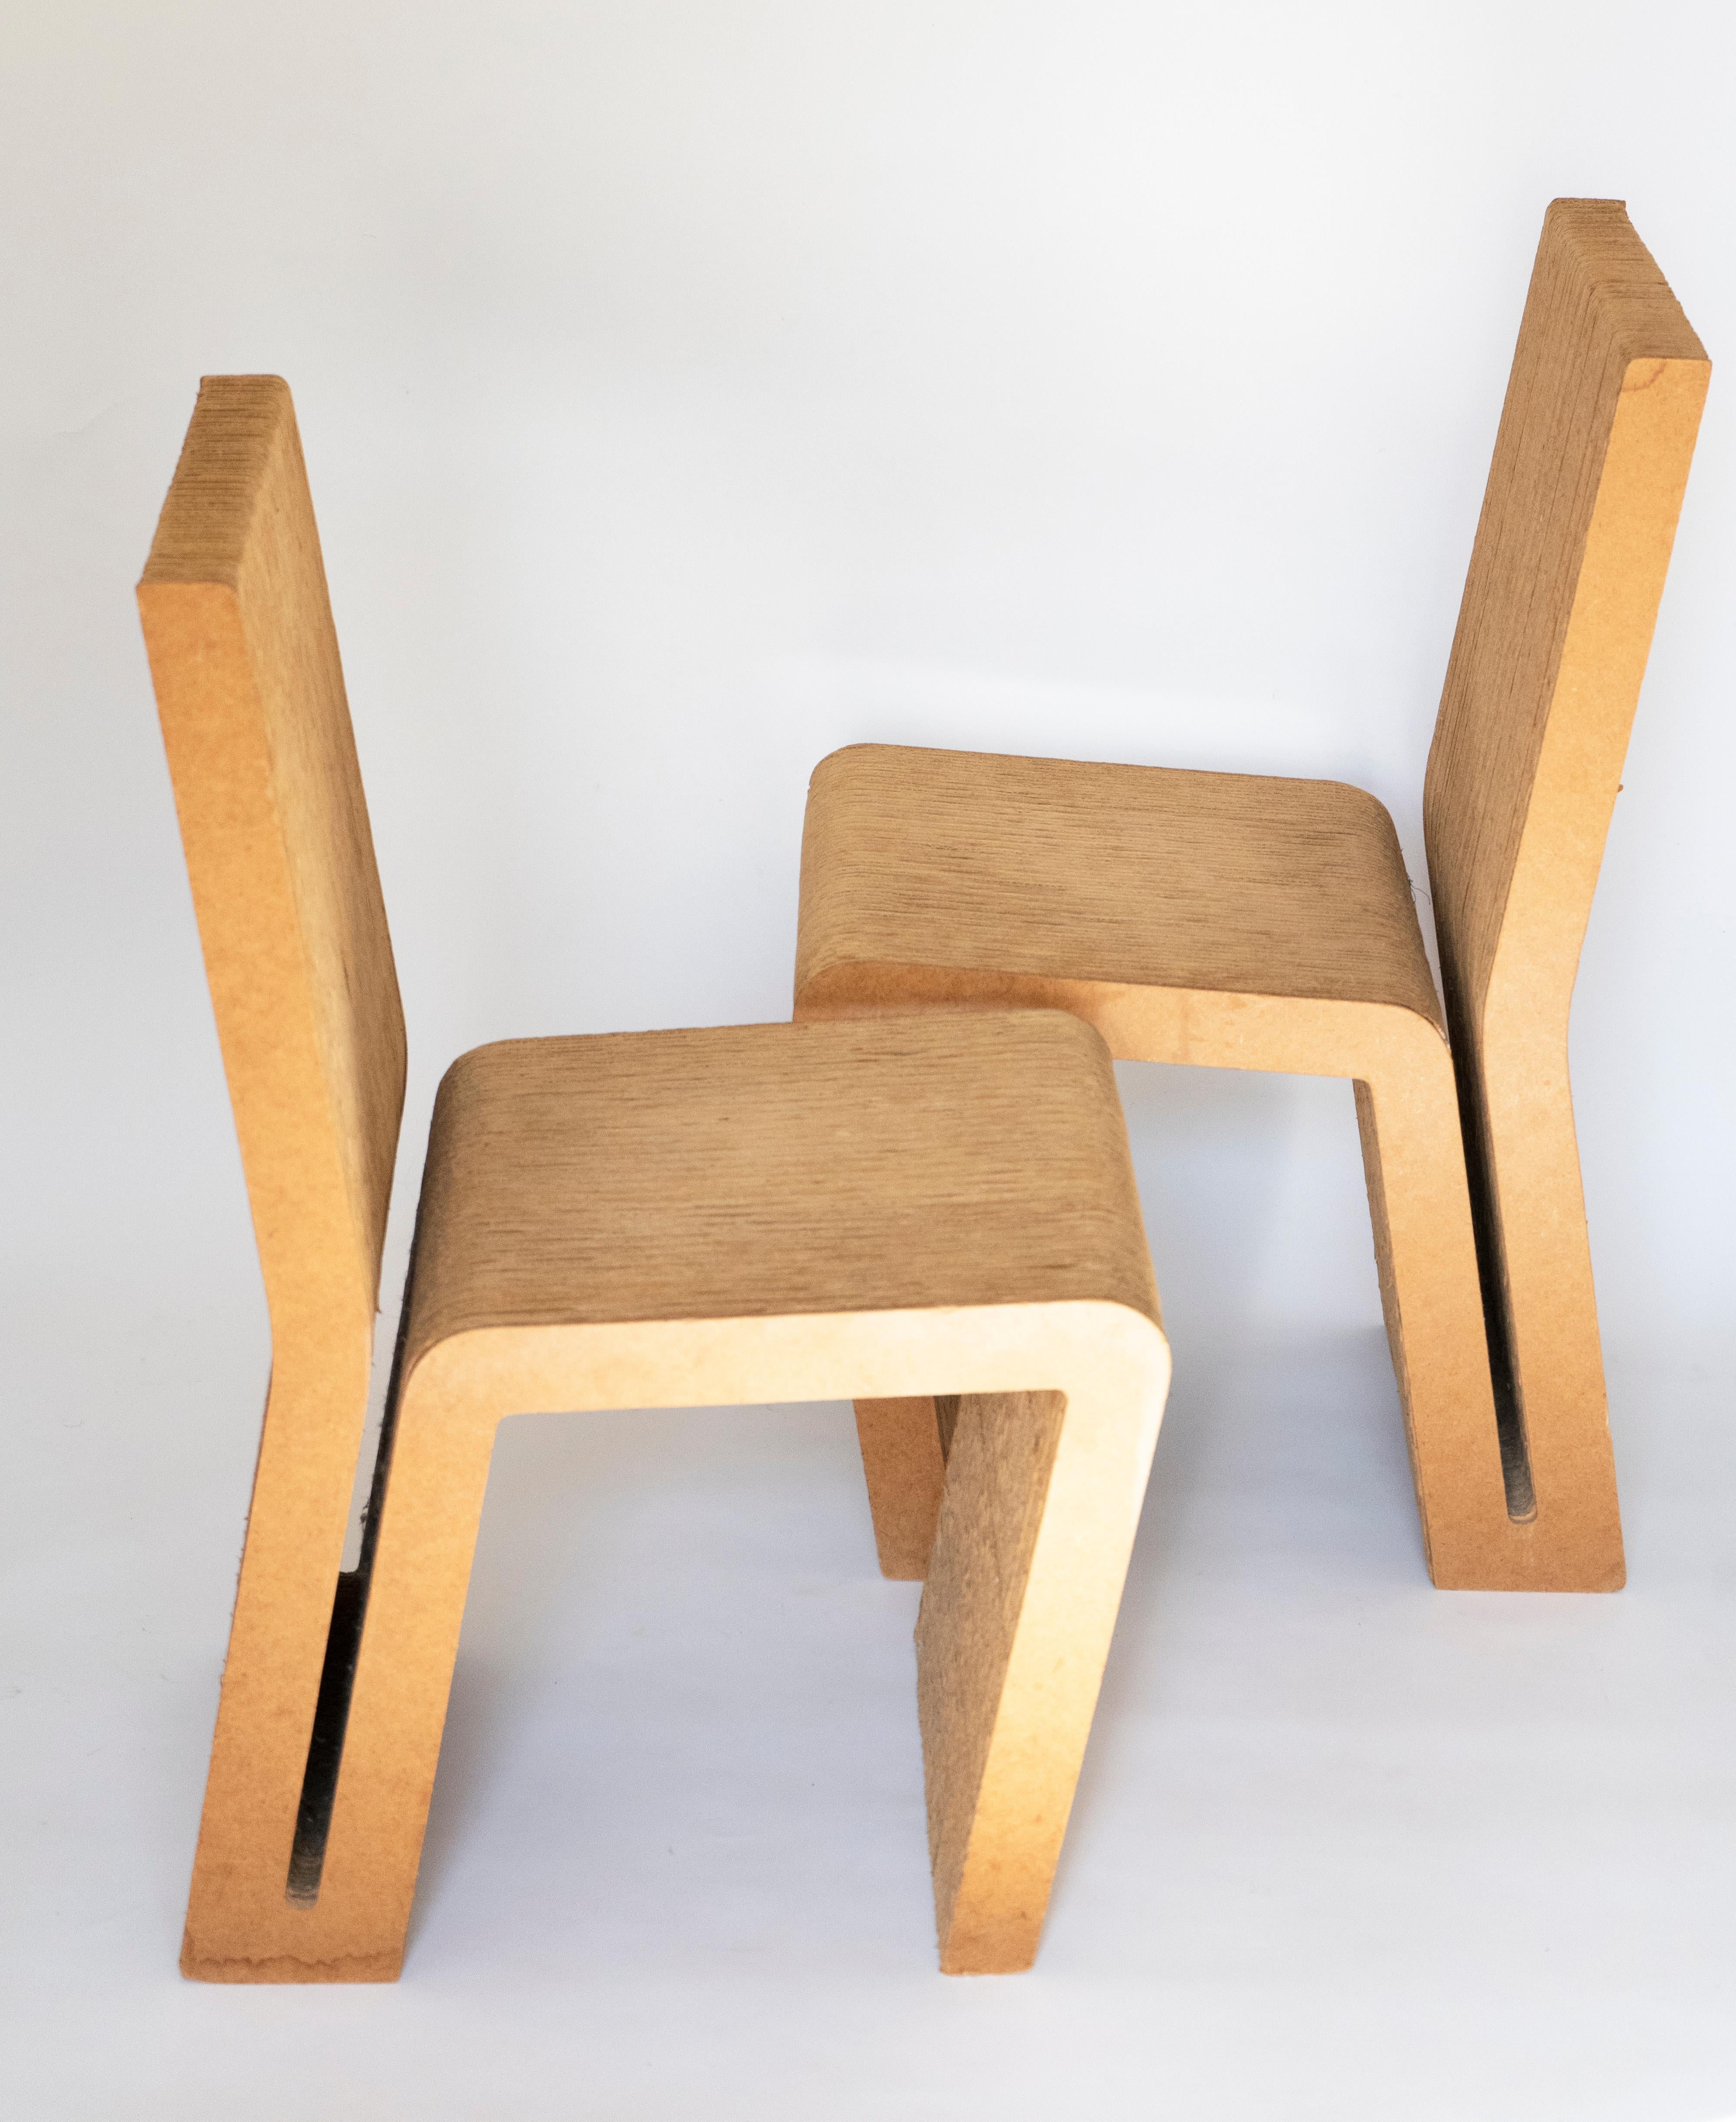 American Easy Edges Cardboard Chair by Frank Gehry, Early 1970s Model For Sale